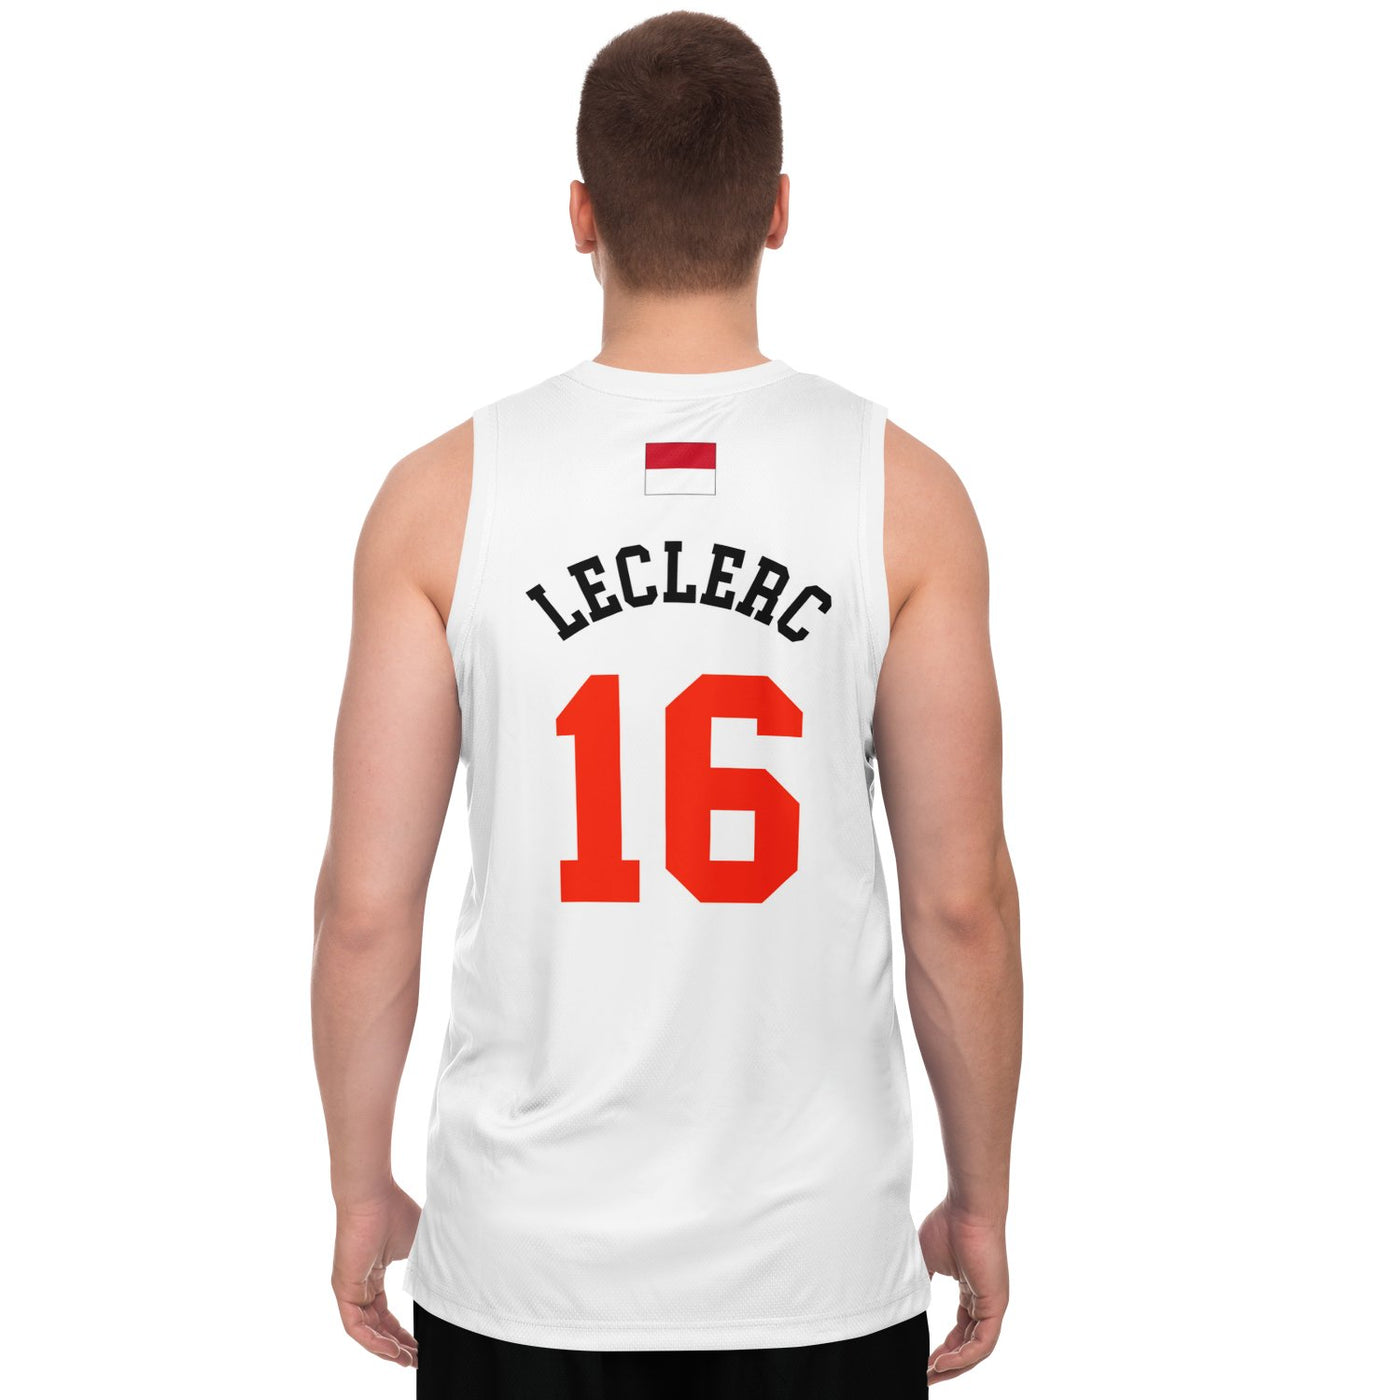 Leclerc - Home White Classic Edition Jersey - Furious Motorsport